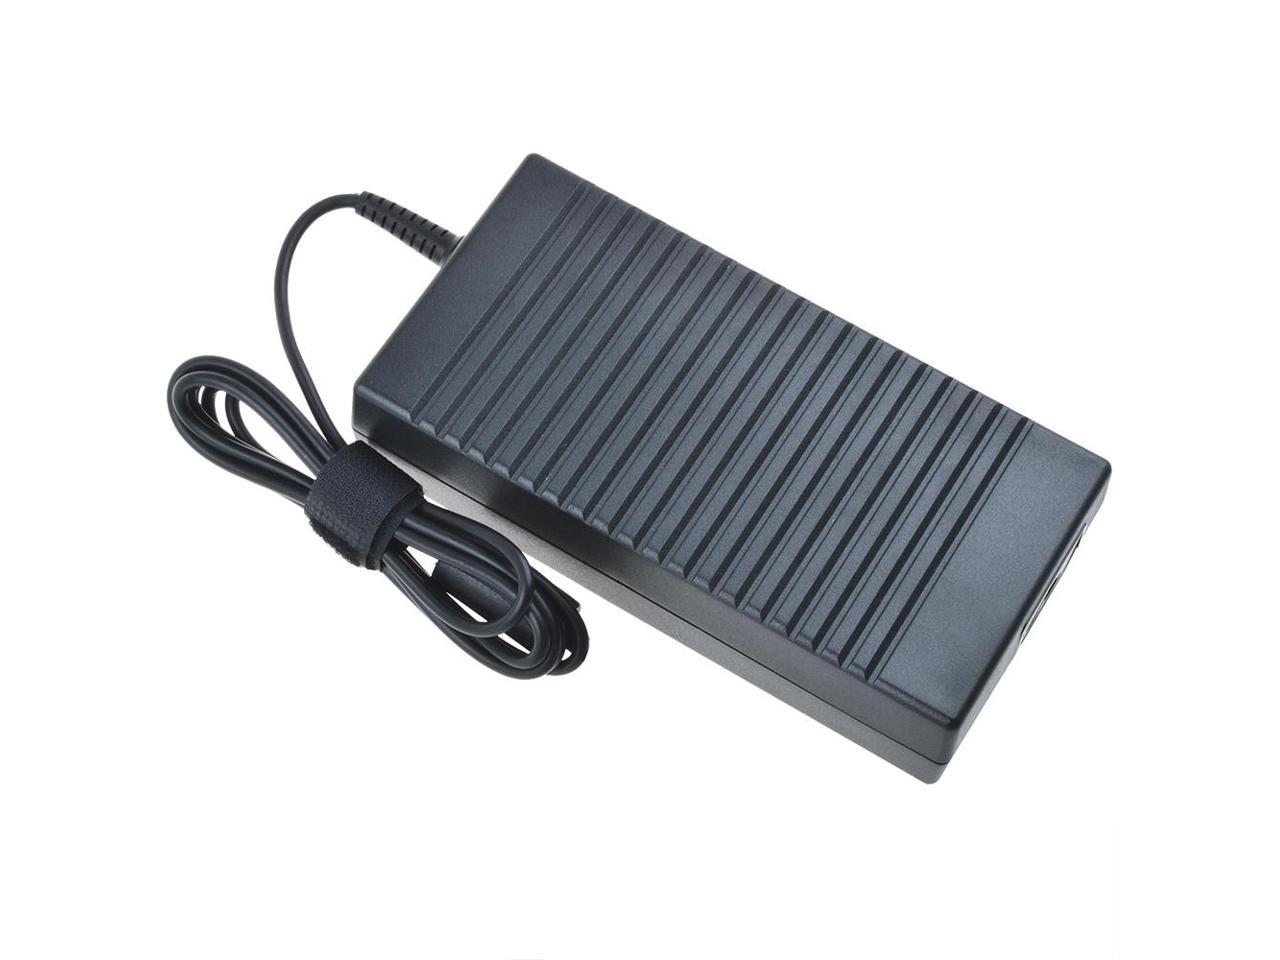 120W 19V AC-DC Adapter for Thin Mini-ITX Motherboards DQ77KB,DH61AG SSA-0901-19 